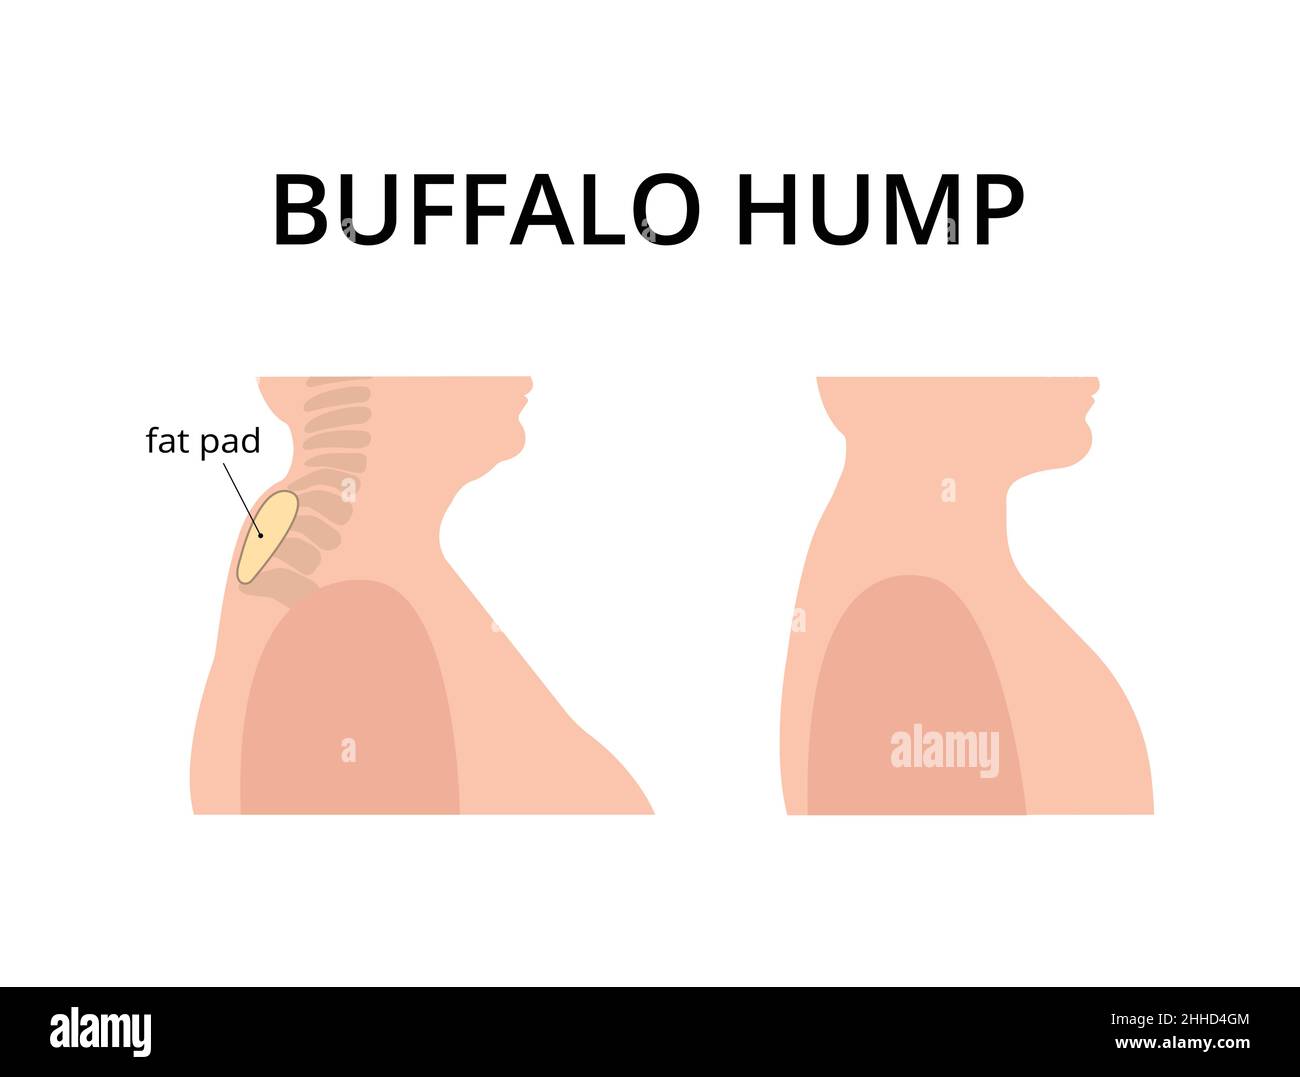 Patient with buffalo hump with fat deposits around the vertebrae. Dowager's hump, kyphosis, spine. For topics like post-menopause, osteoperosis, scoli Stock Vector